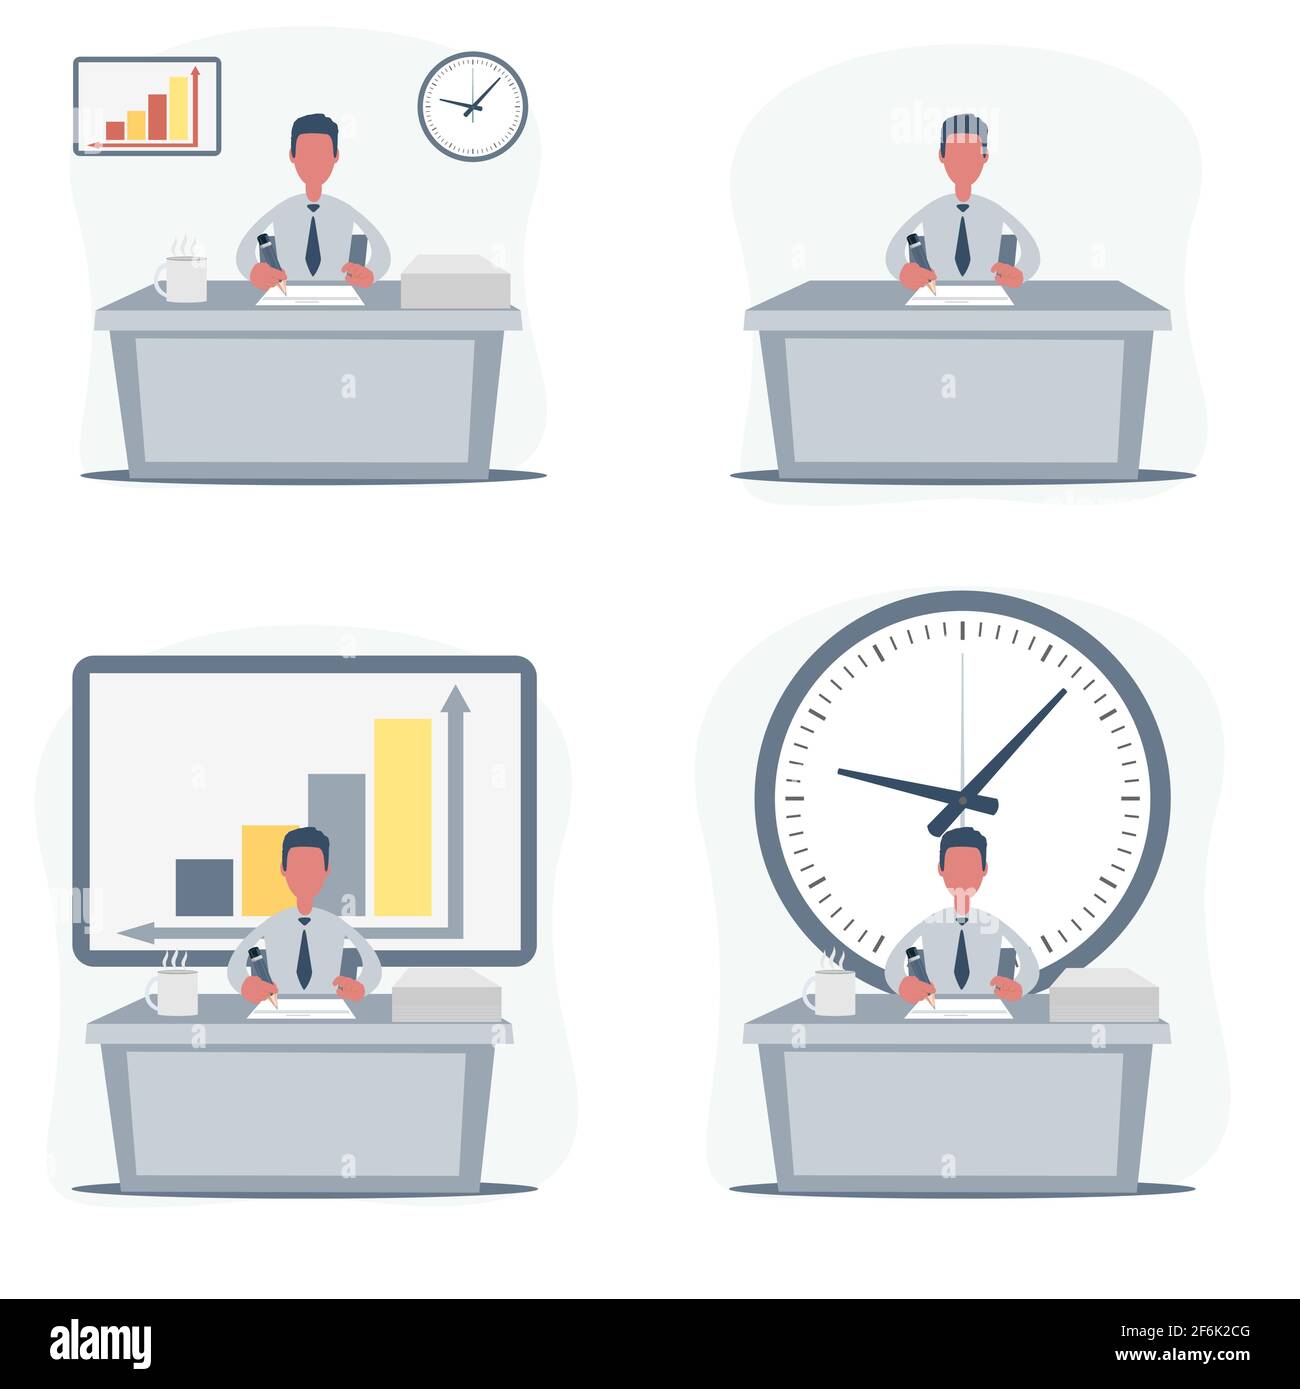 Cartoon Businessman Sitting Work Desk Cut Out Stock Images And Pictures Alamy 3785